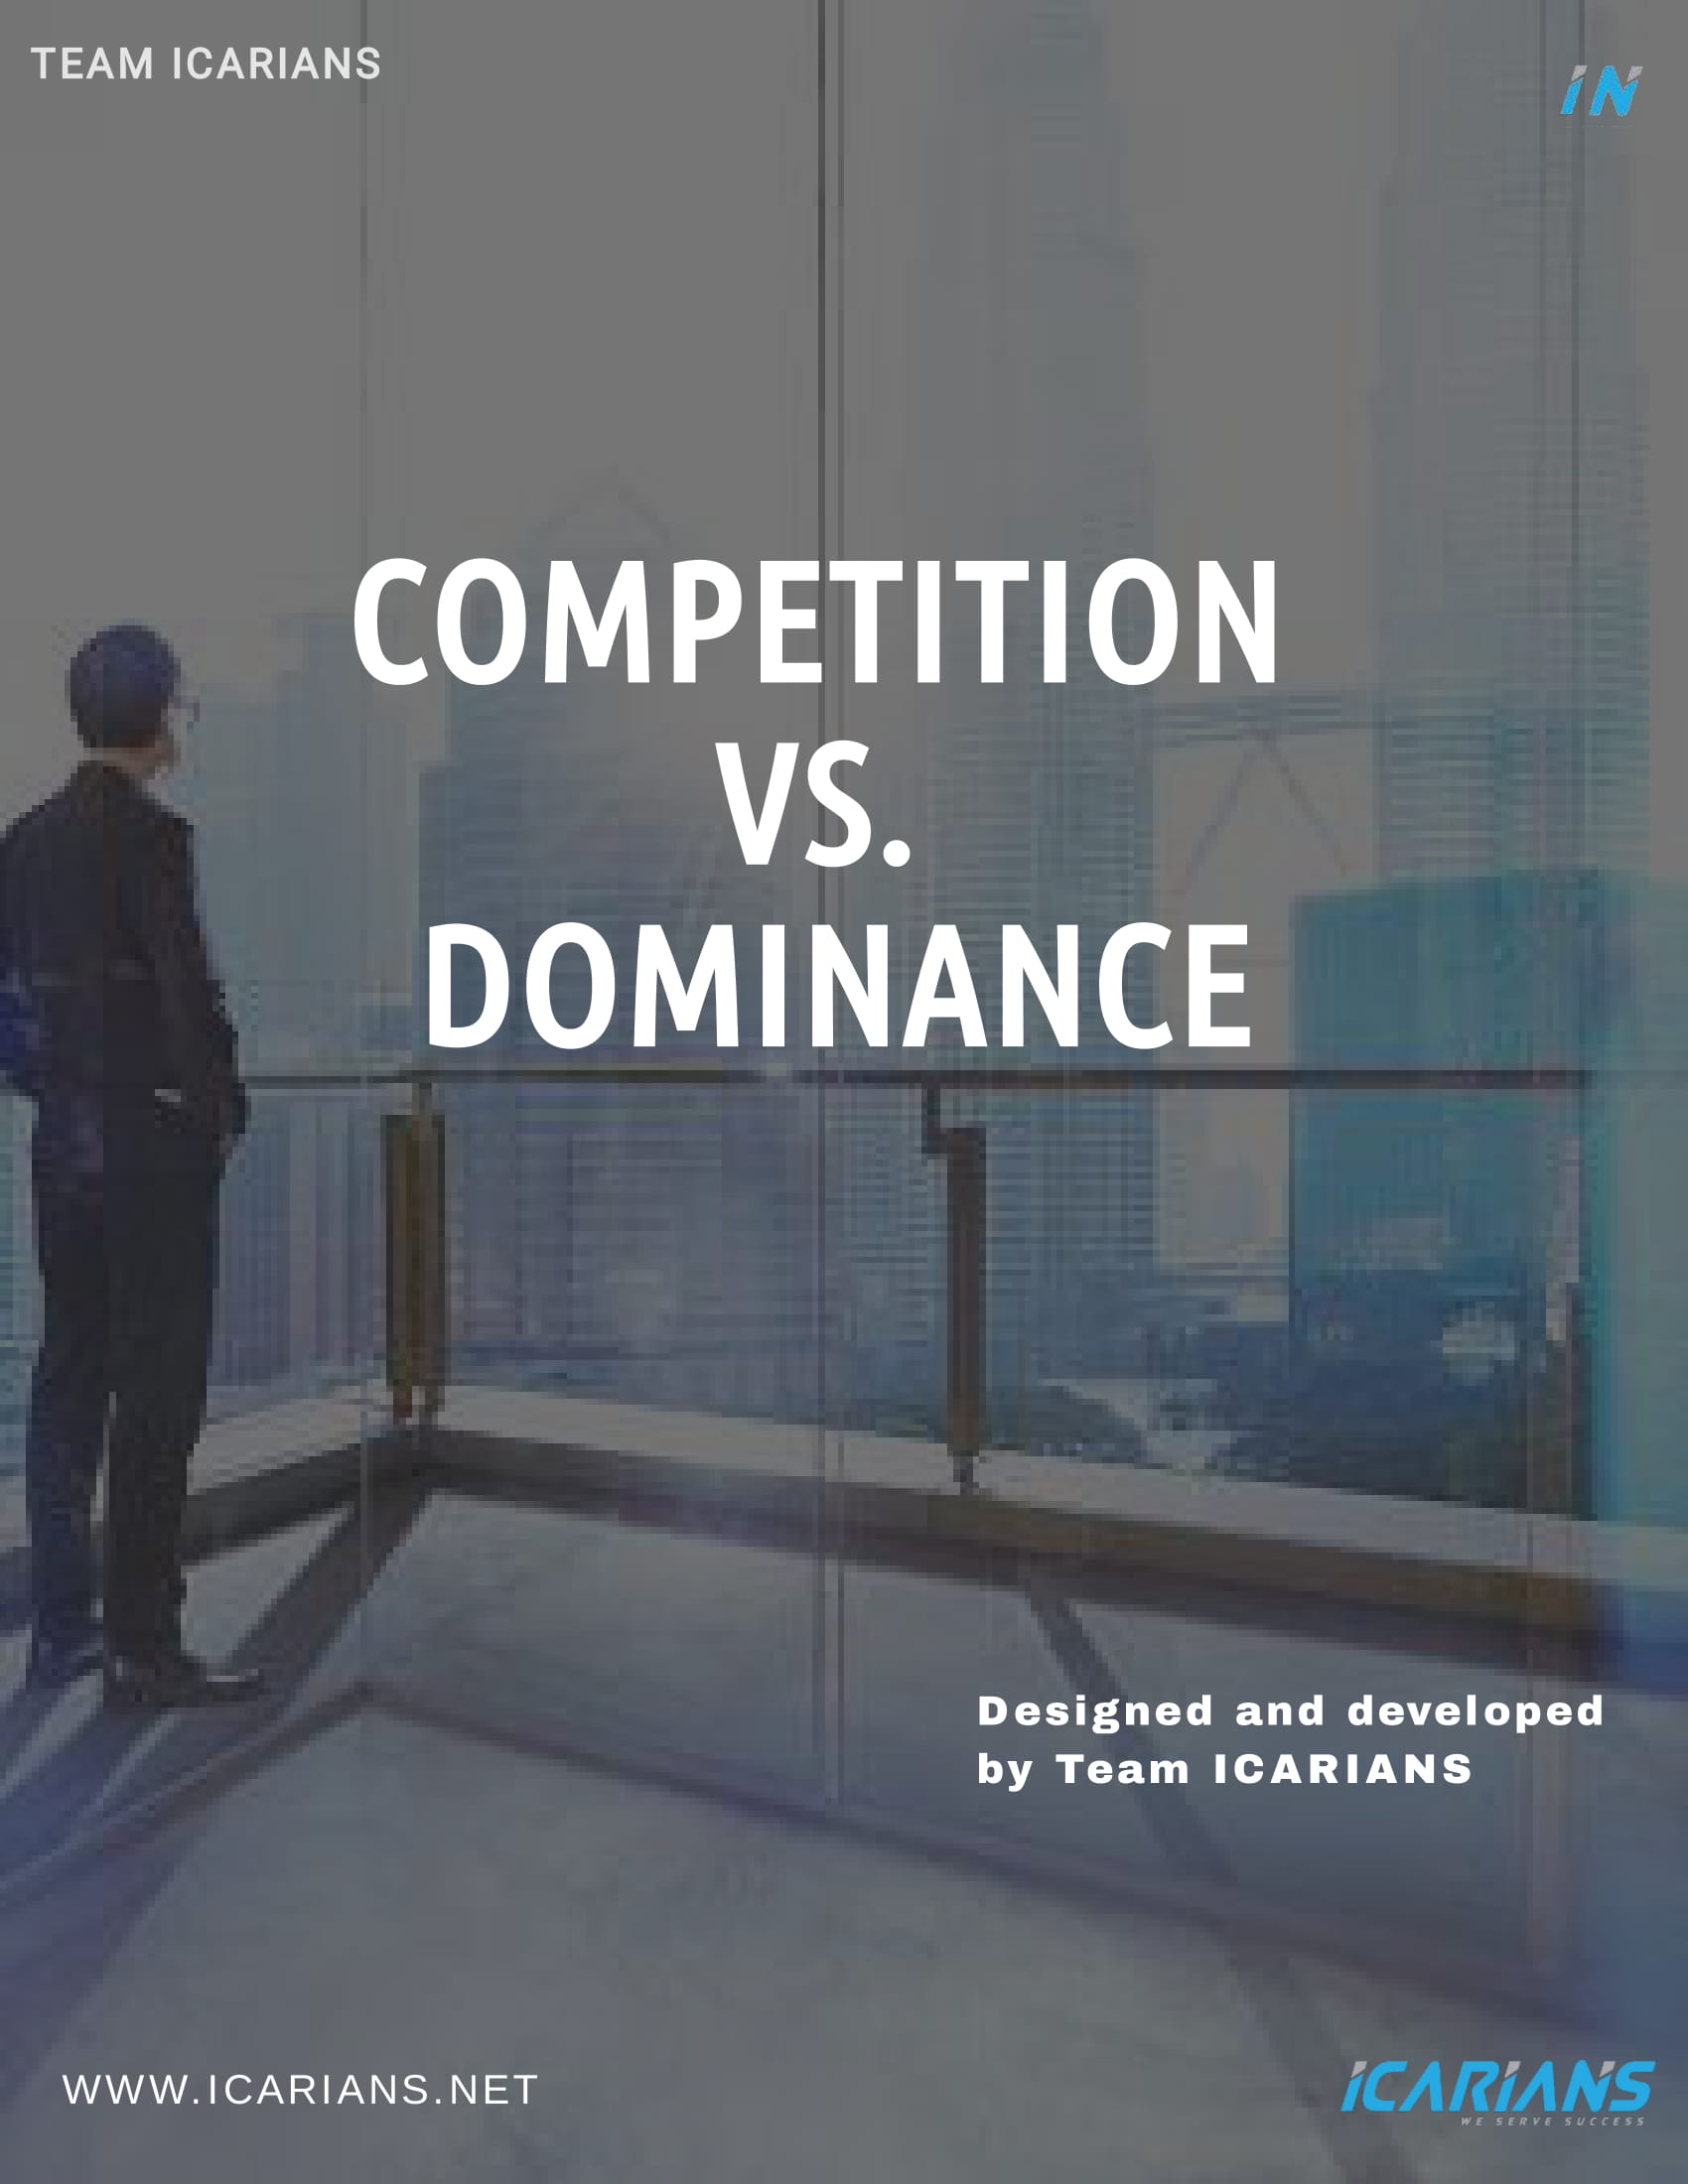 COMPETITION VS. DOMINANCE